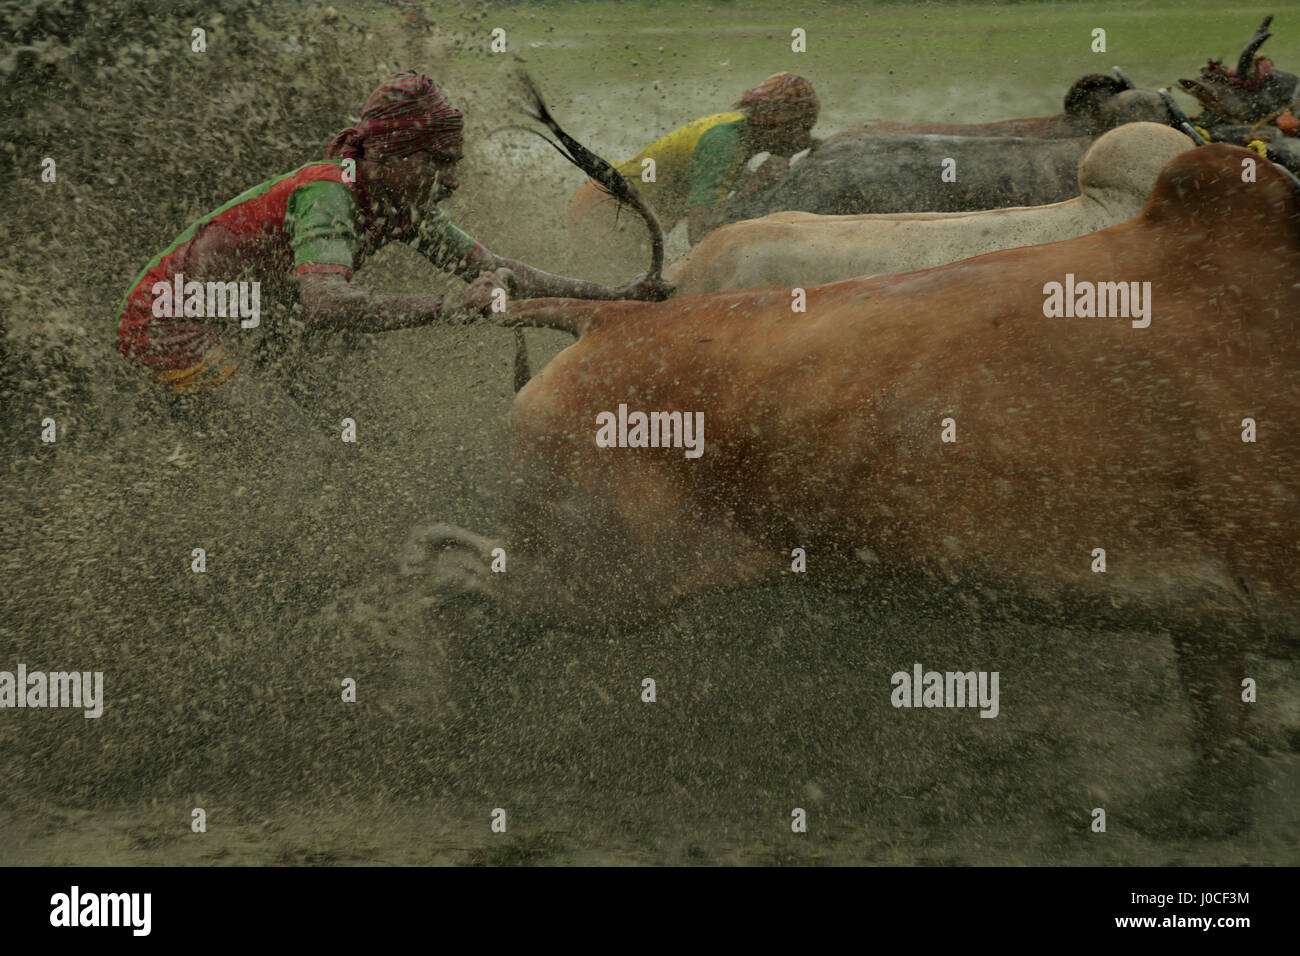 Bull race, Bengale occidental, Inde, Asie Banque D'Images